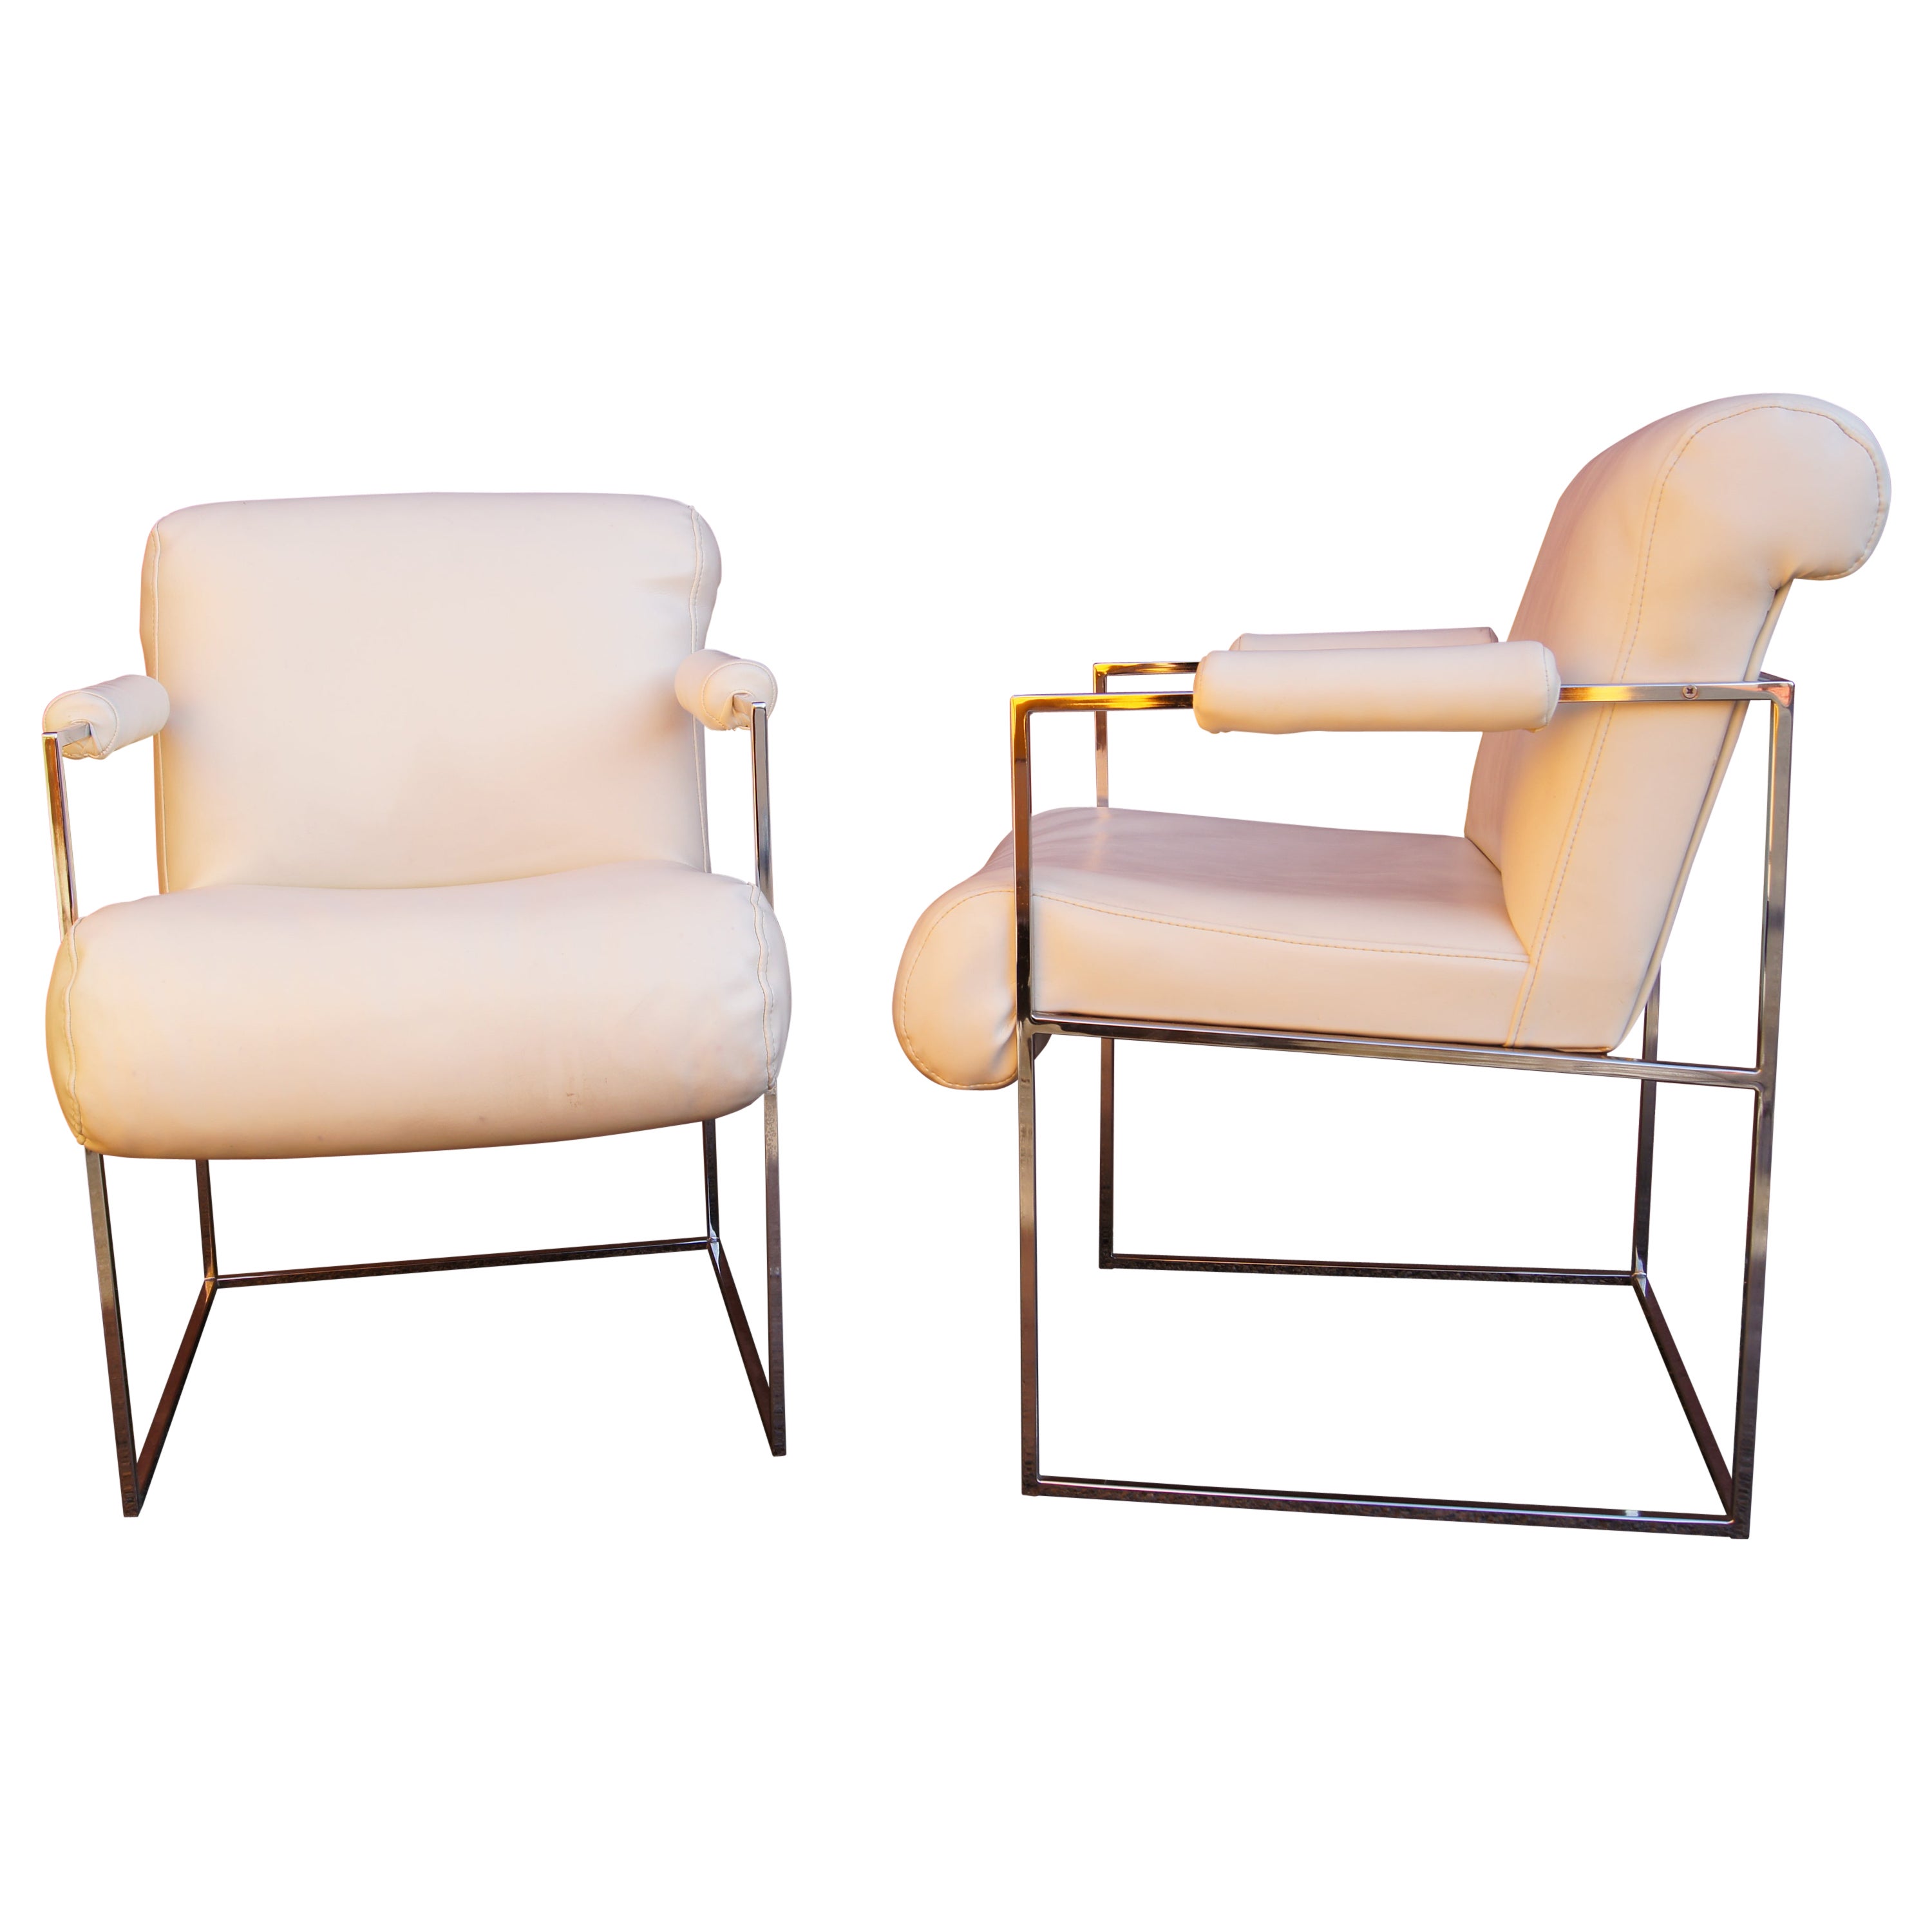 Pair of Thin Line Chrome Armchairs by Milo Baughman for Thayer Coggin